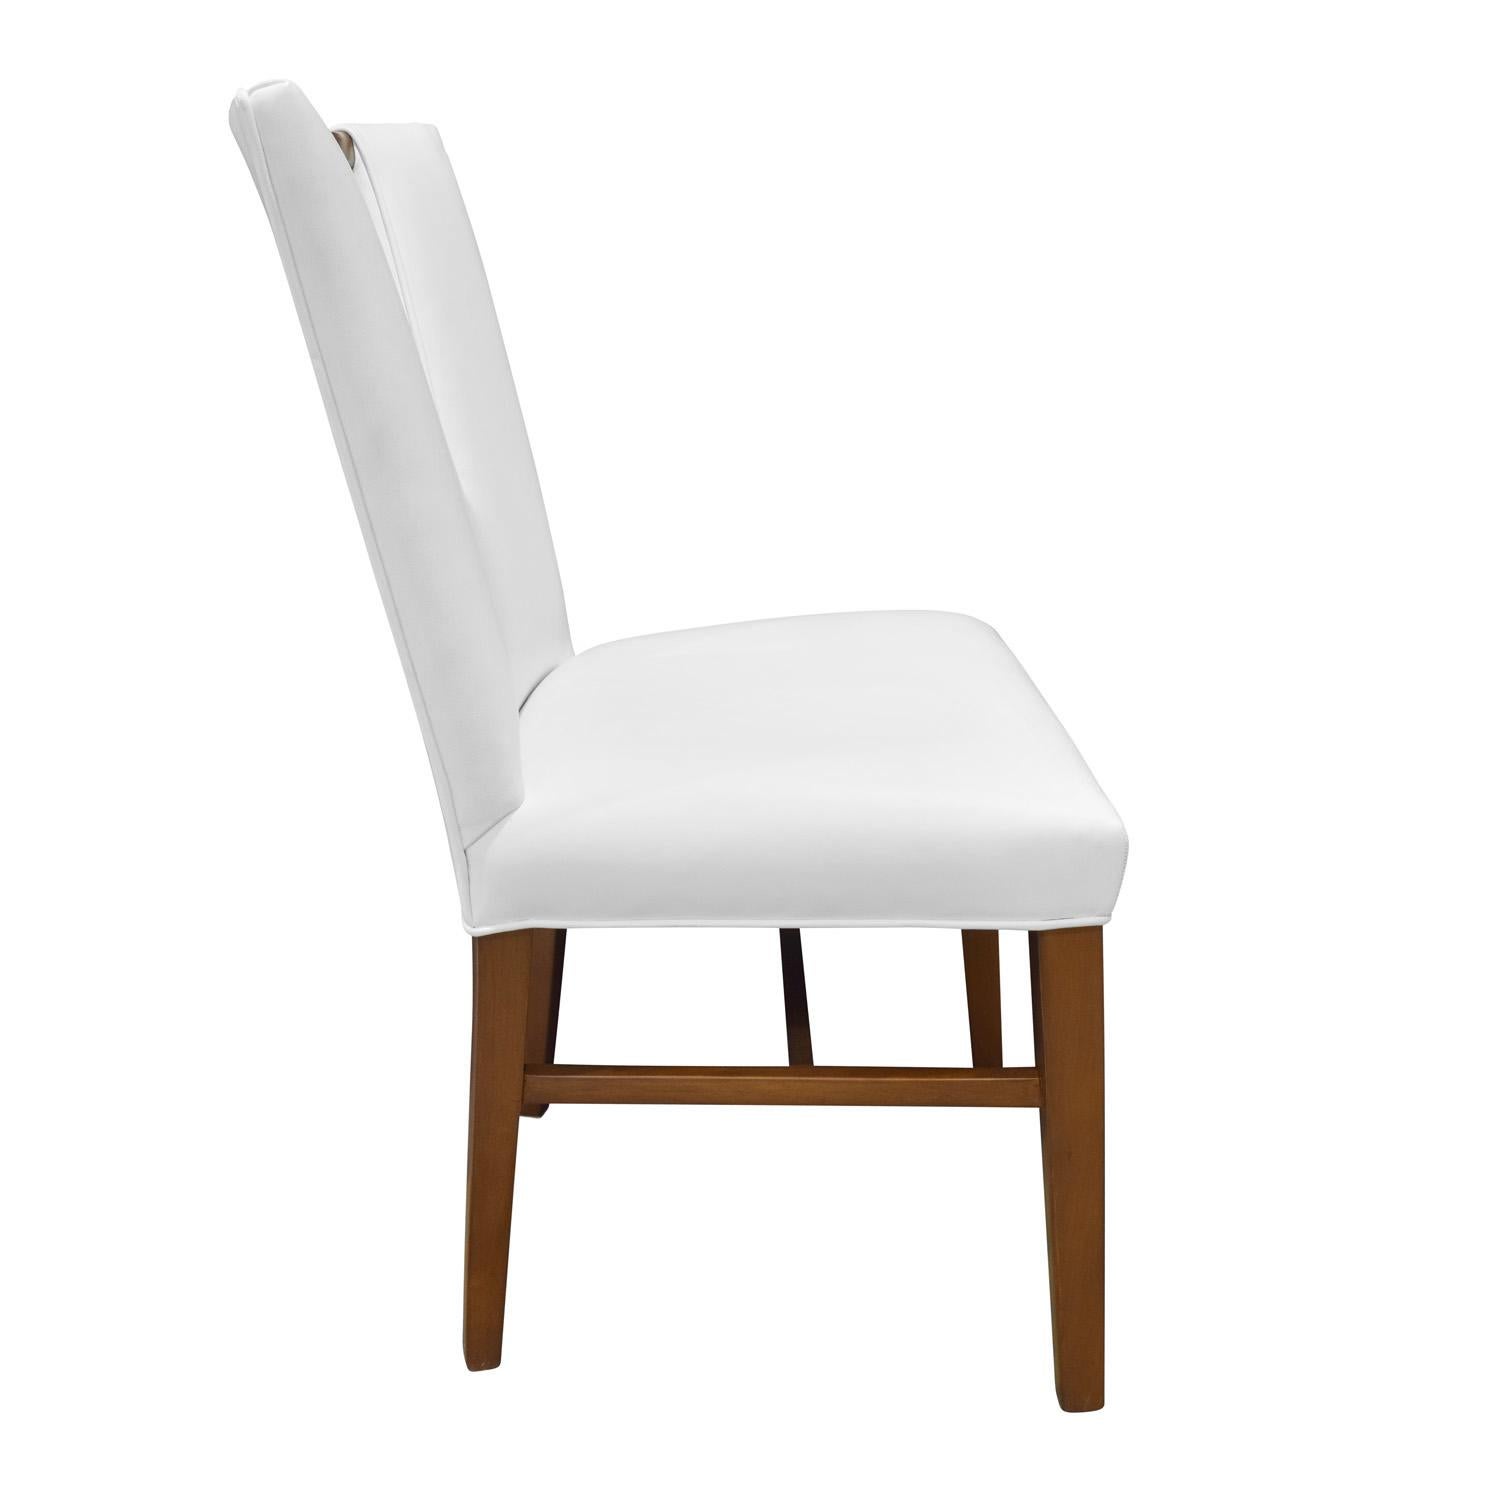 game plastic chairs prices